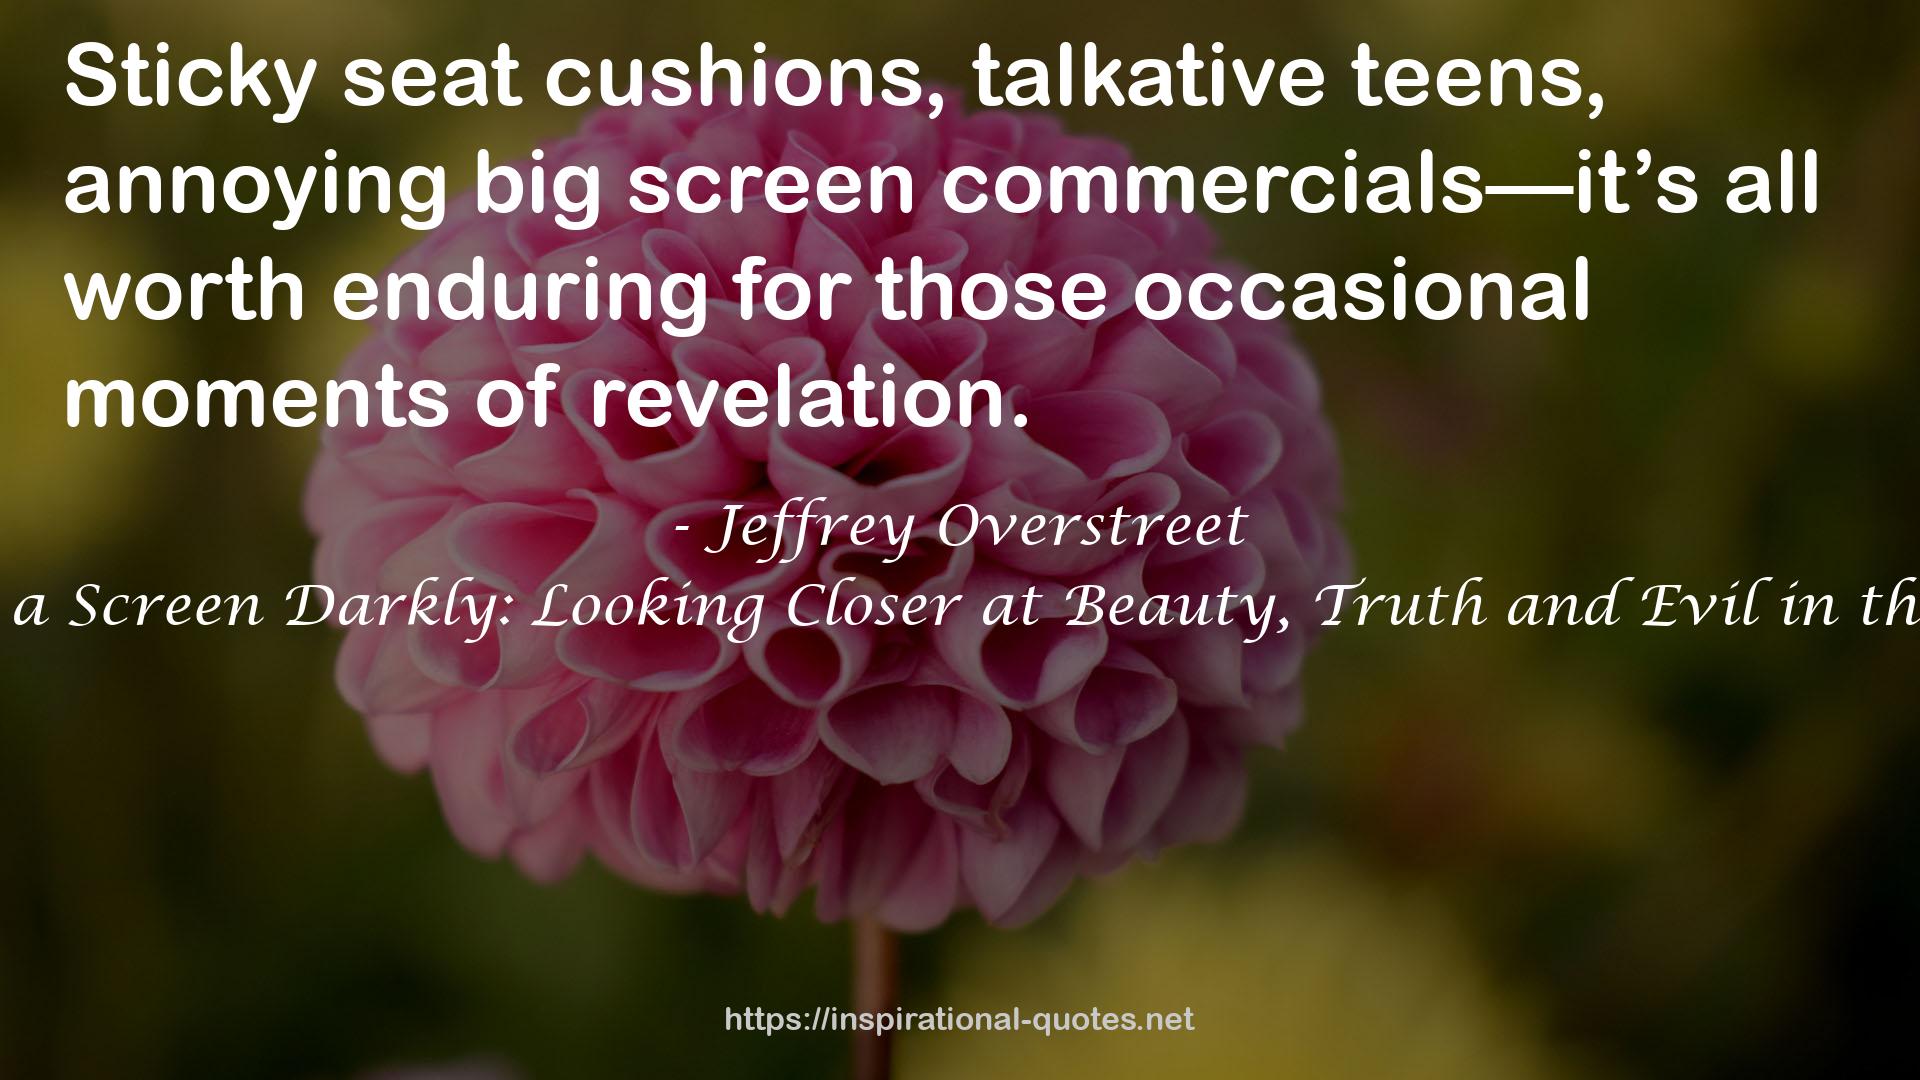 Through a Screen Darkly: Looking Closer at Beauty, Truth and Evil in the Movies QUOTES